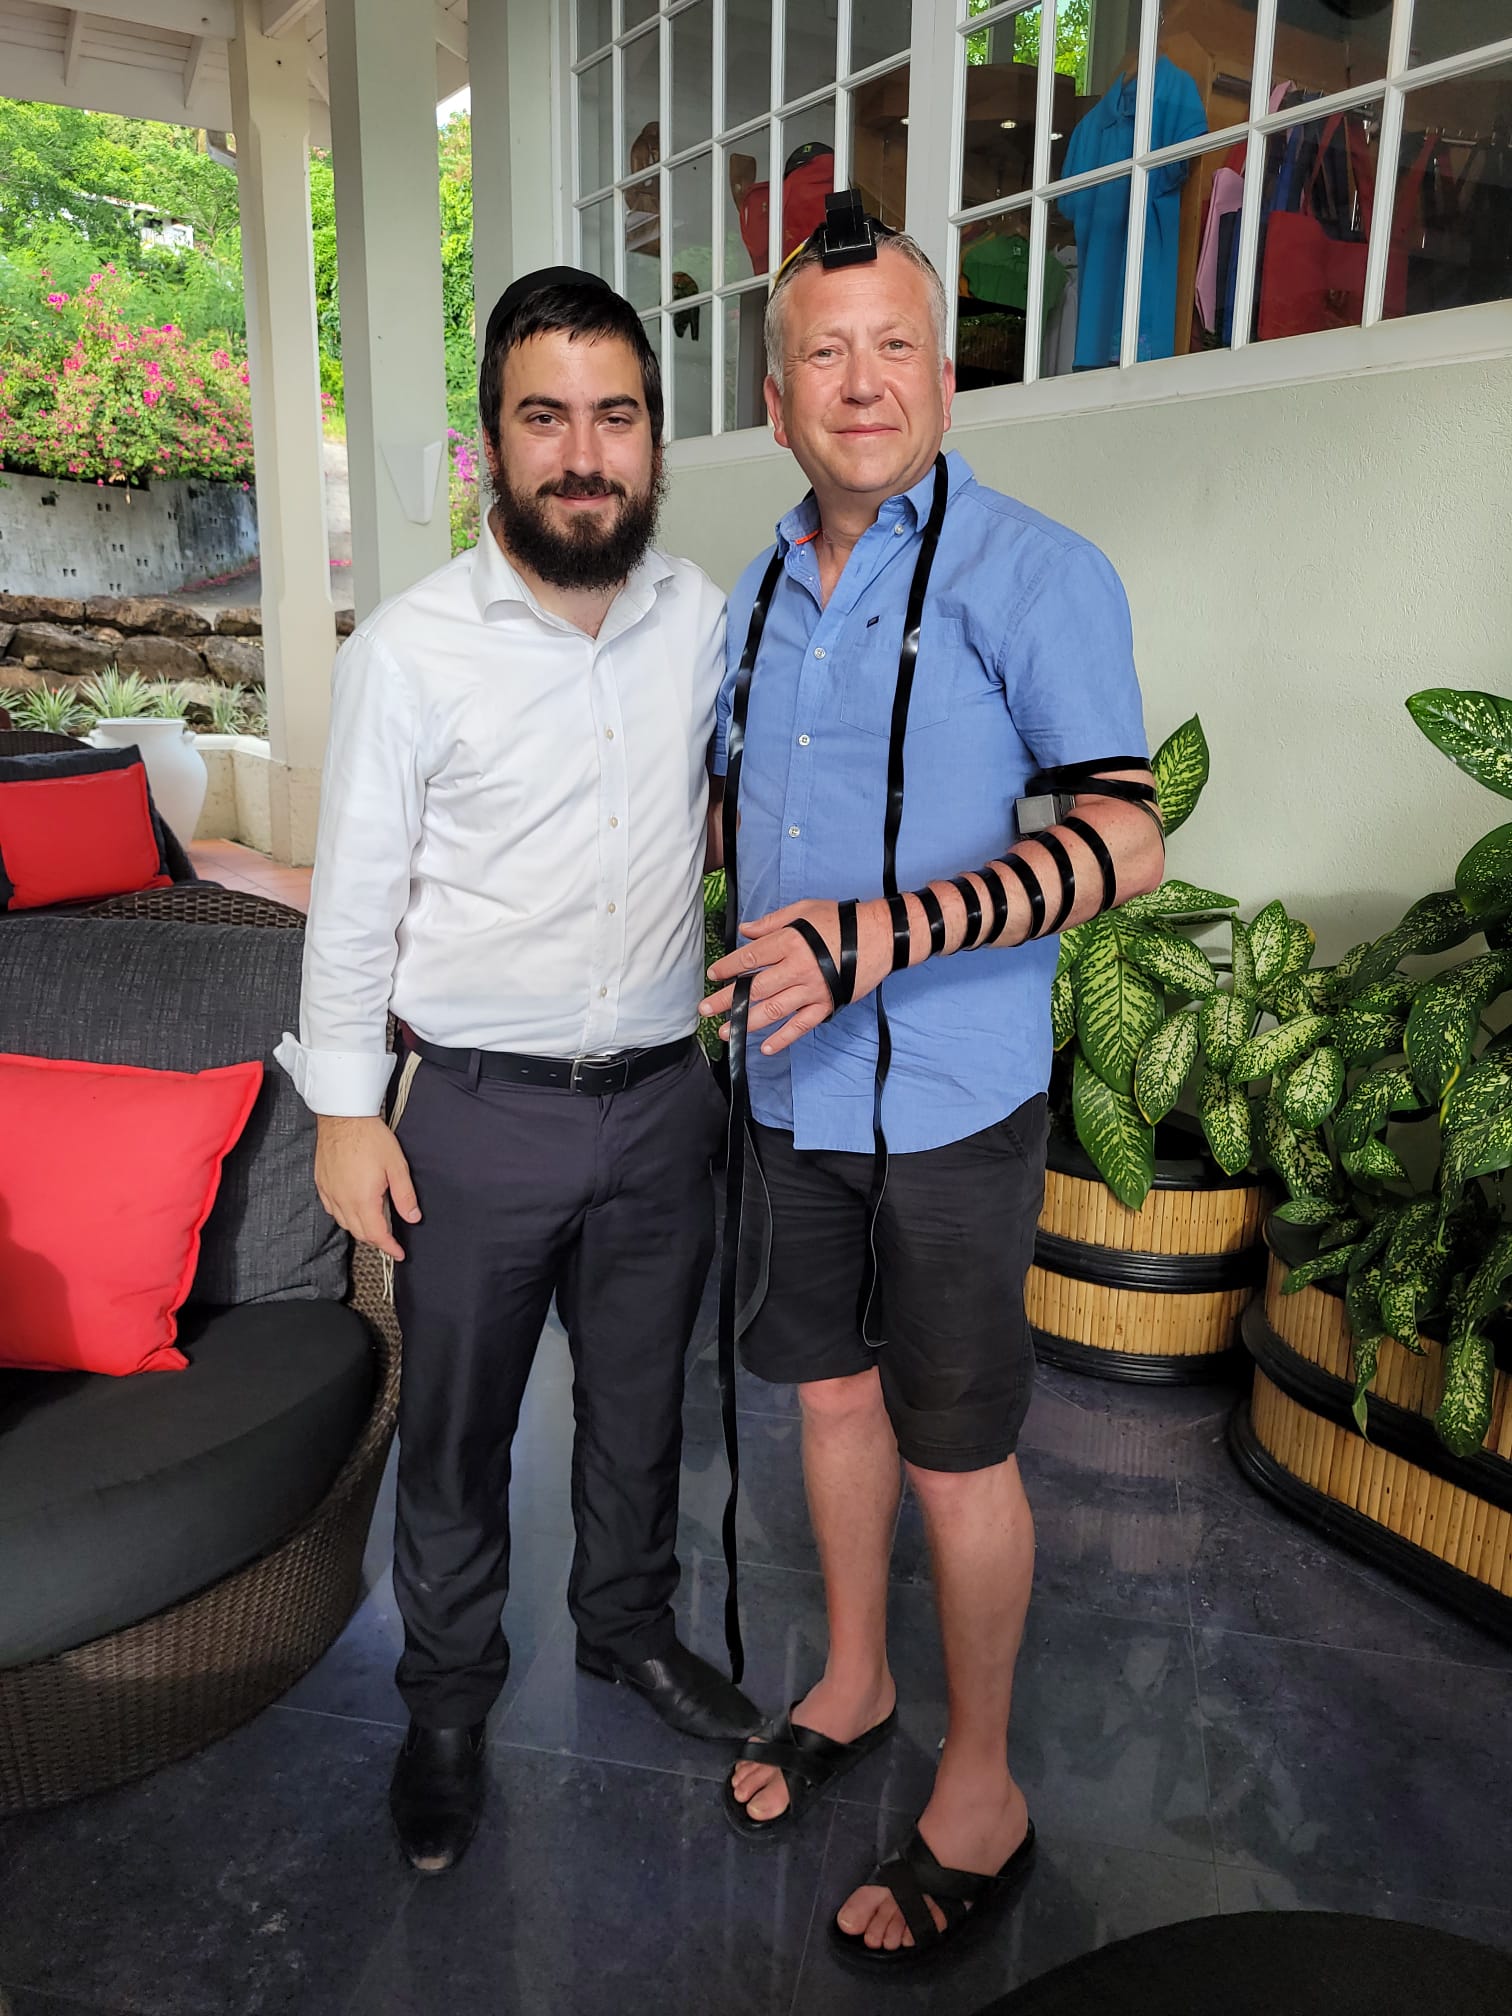 Mark with Rabbi Super after laying Tefillin